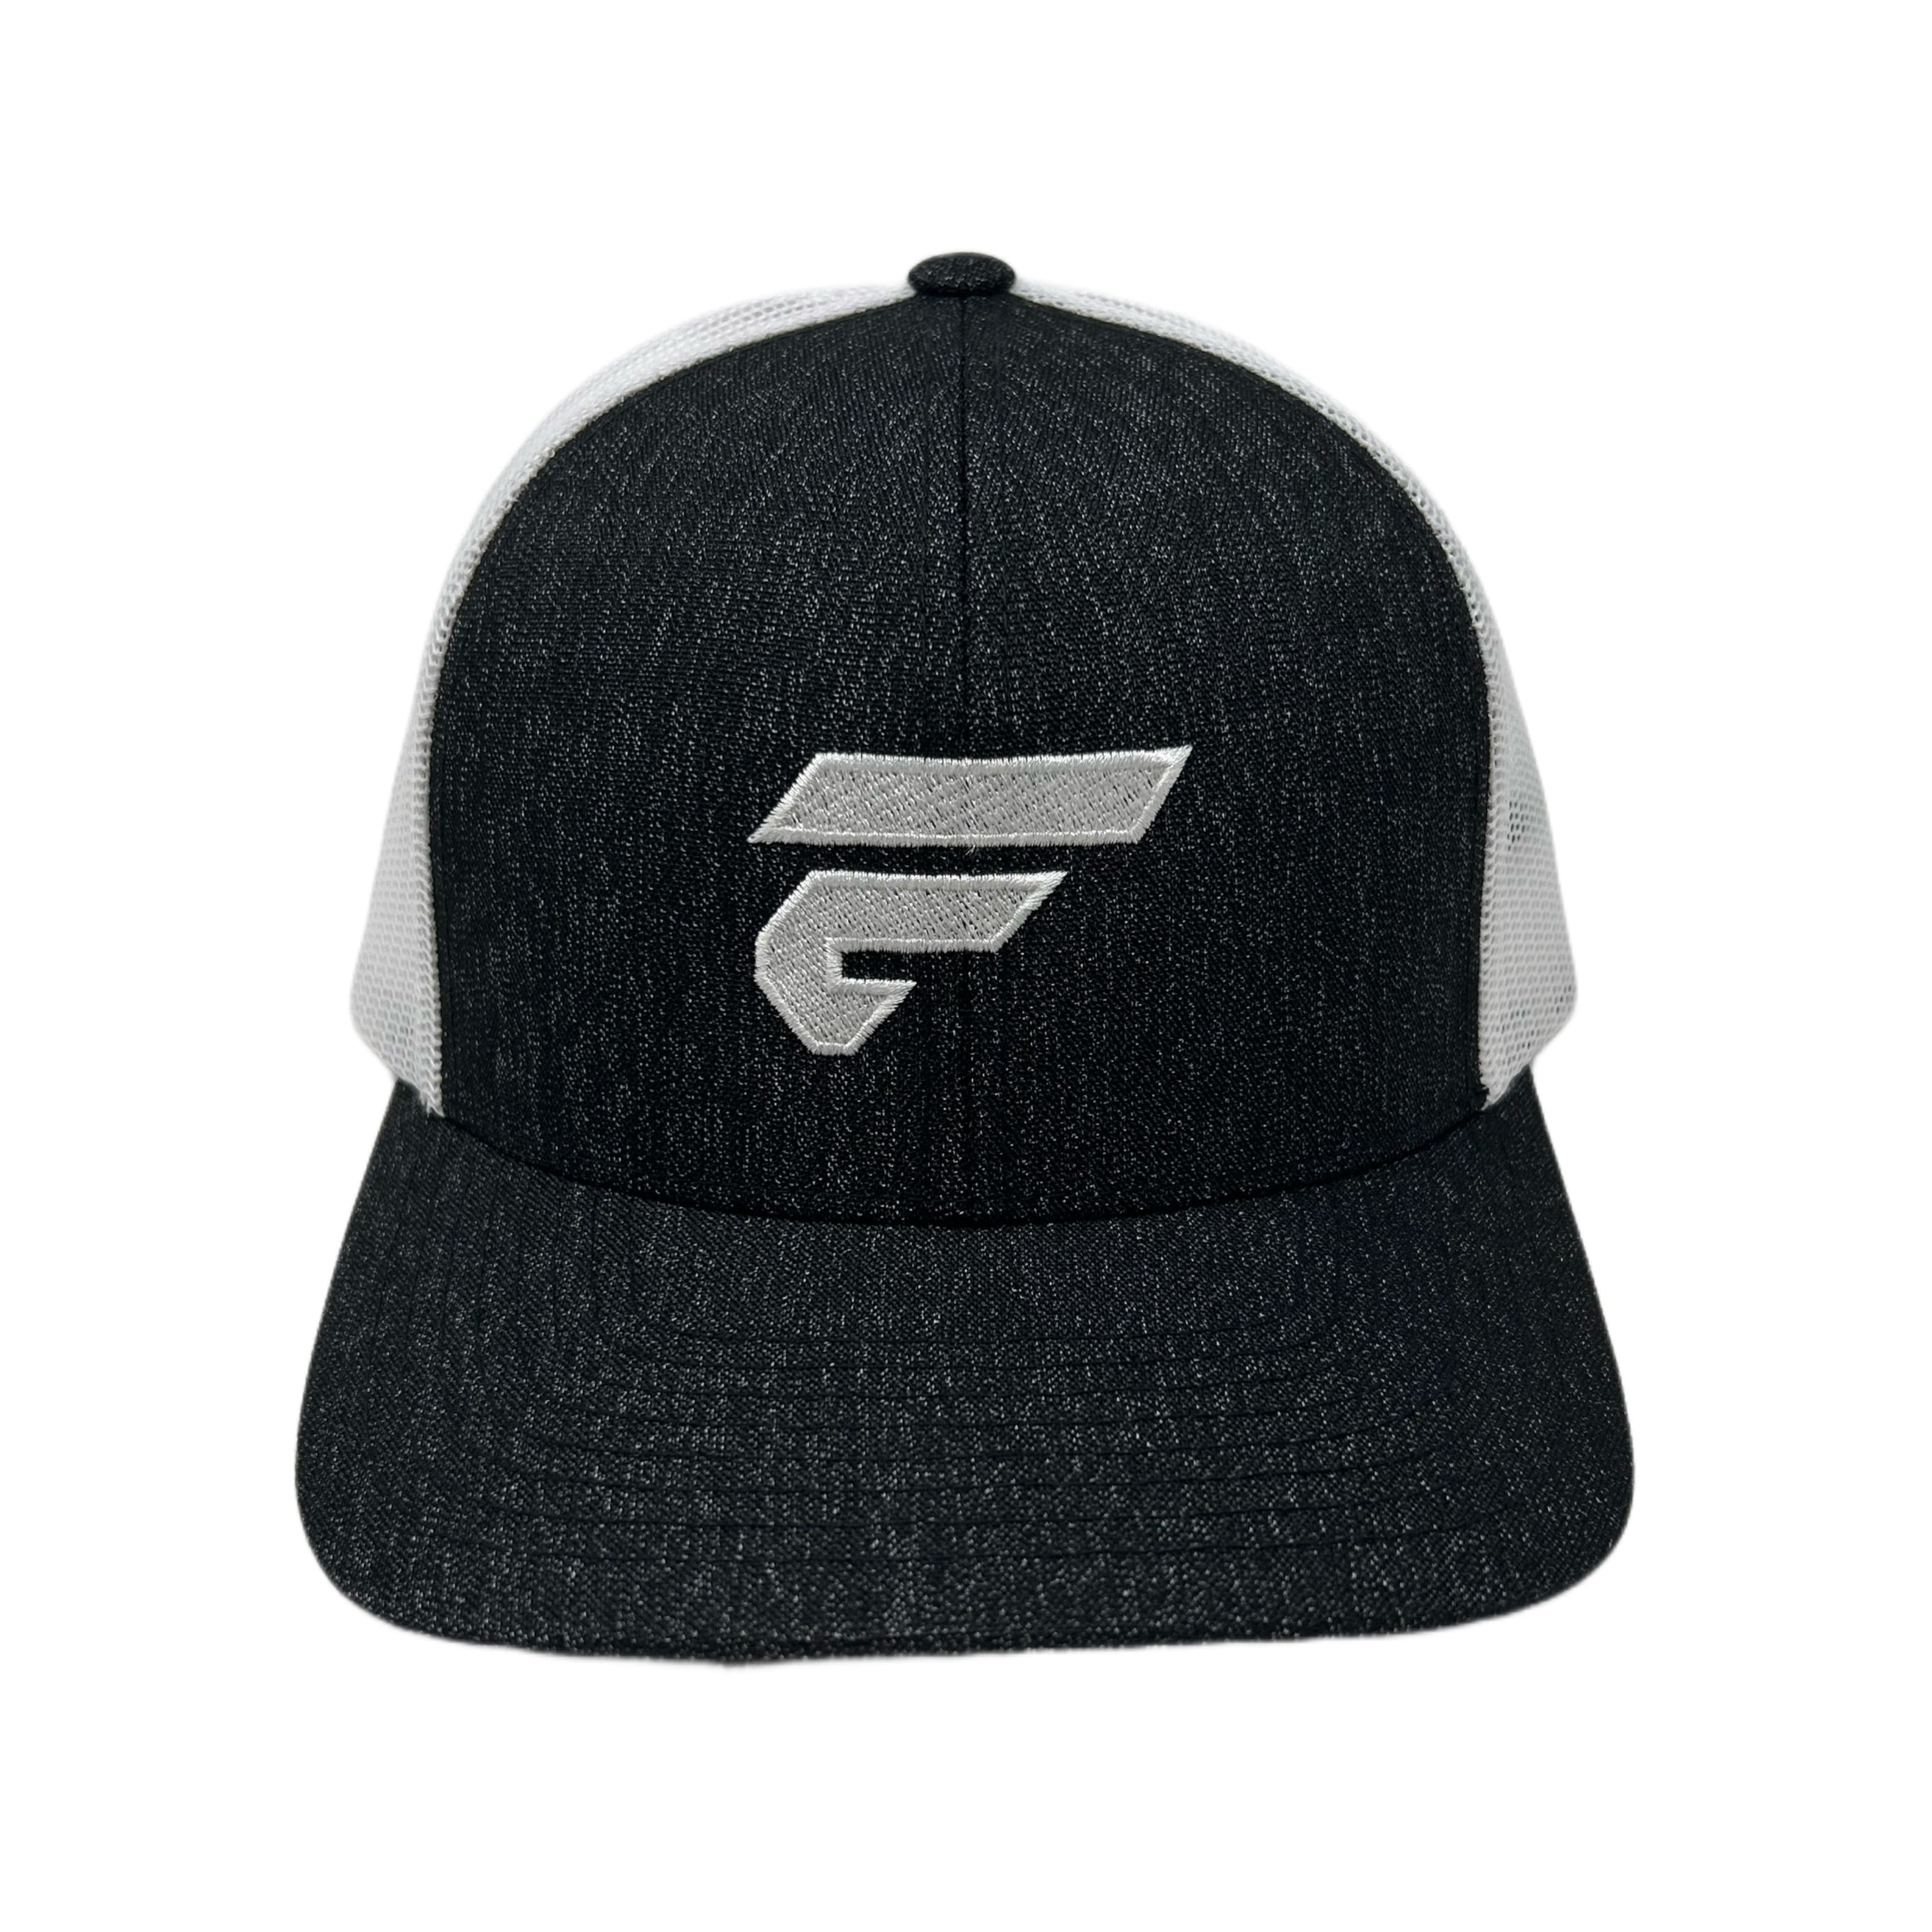 Fire Cornhole Black Heather/White Back Fitted Hat with FC Logo